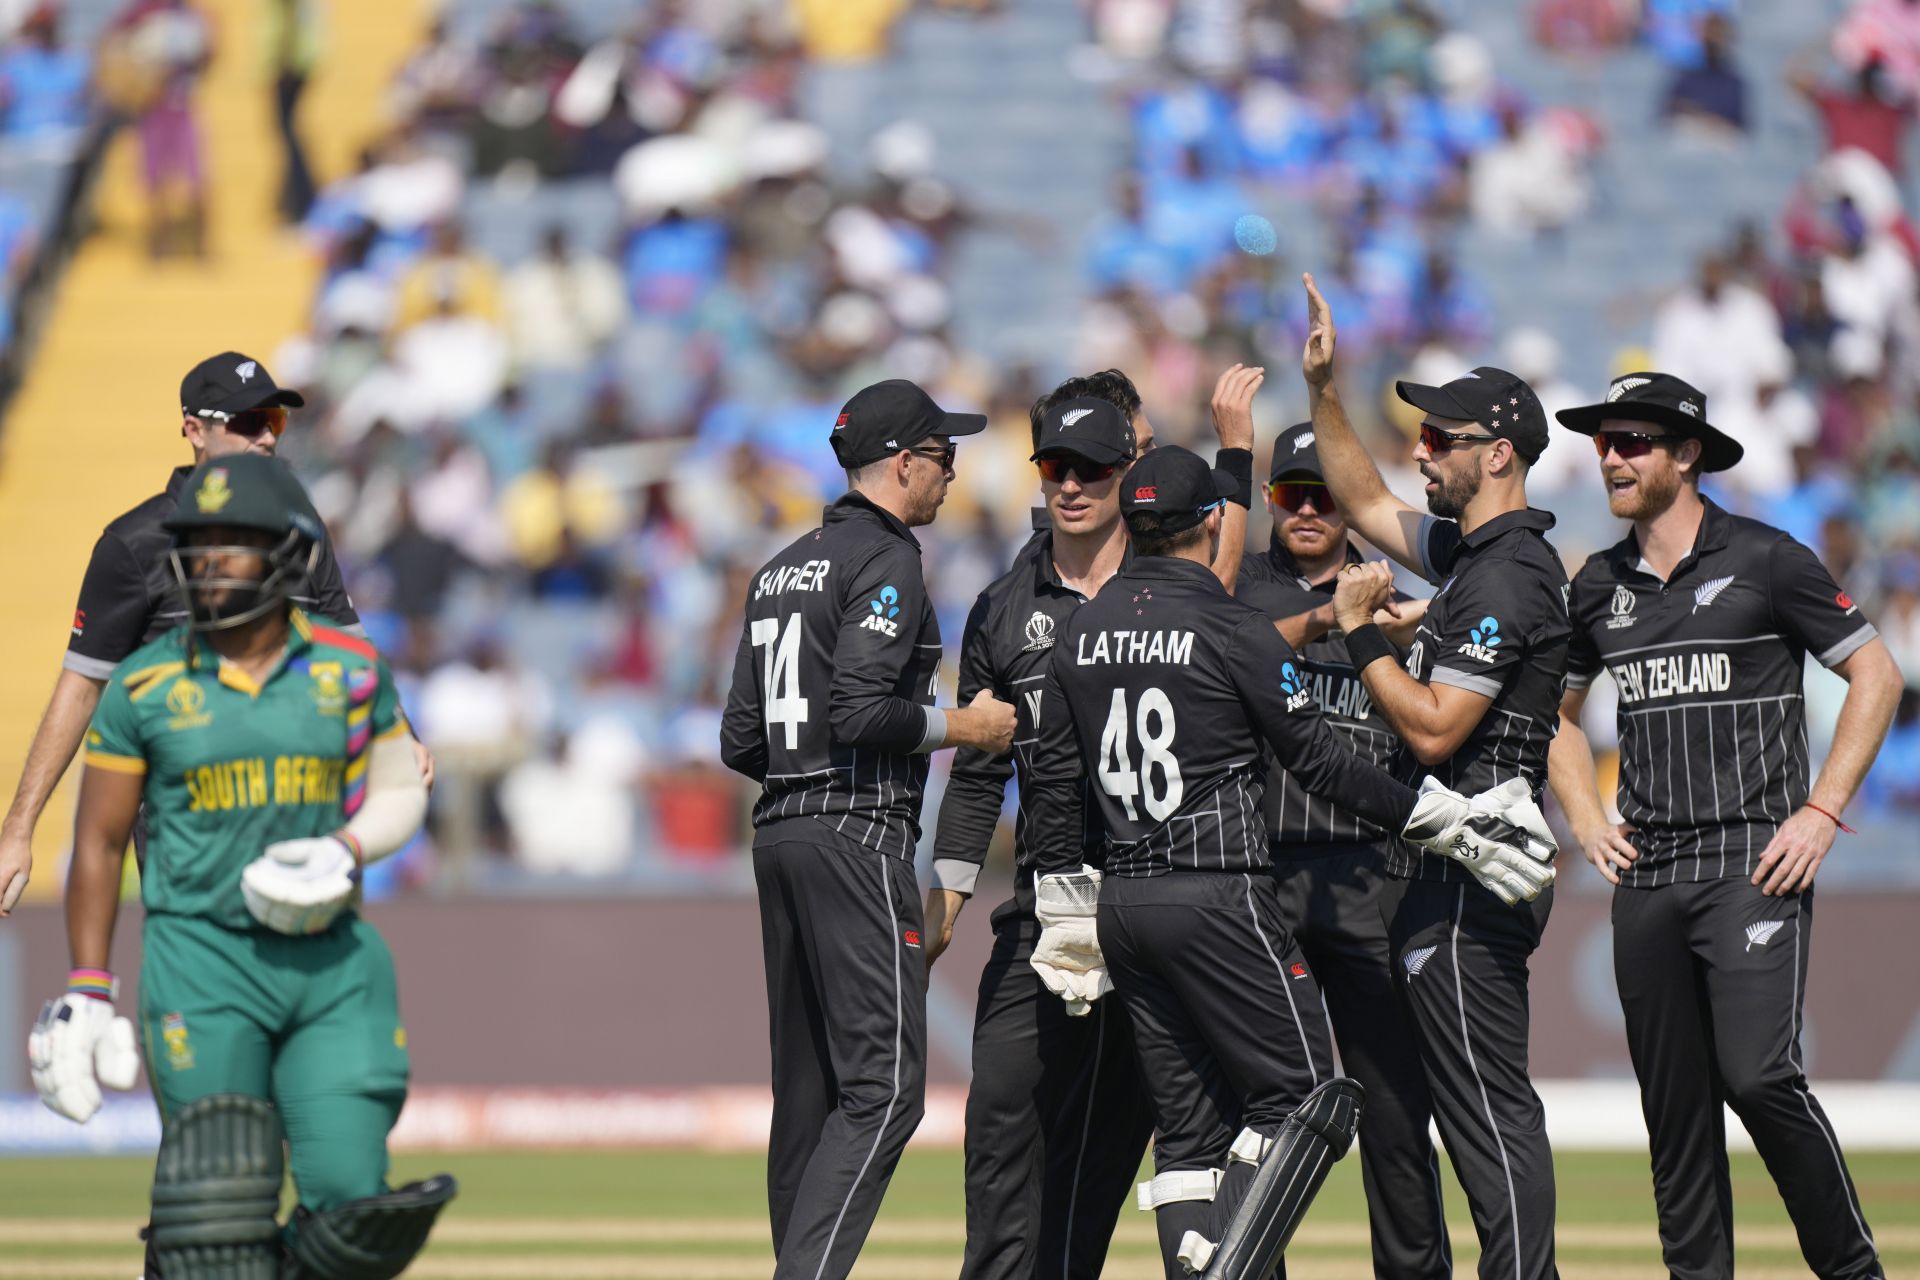 New Zealand have lost their way after a sensational start. (Pic: AP)